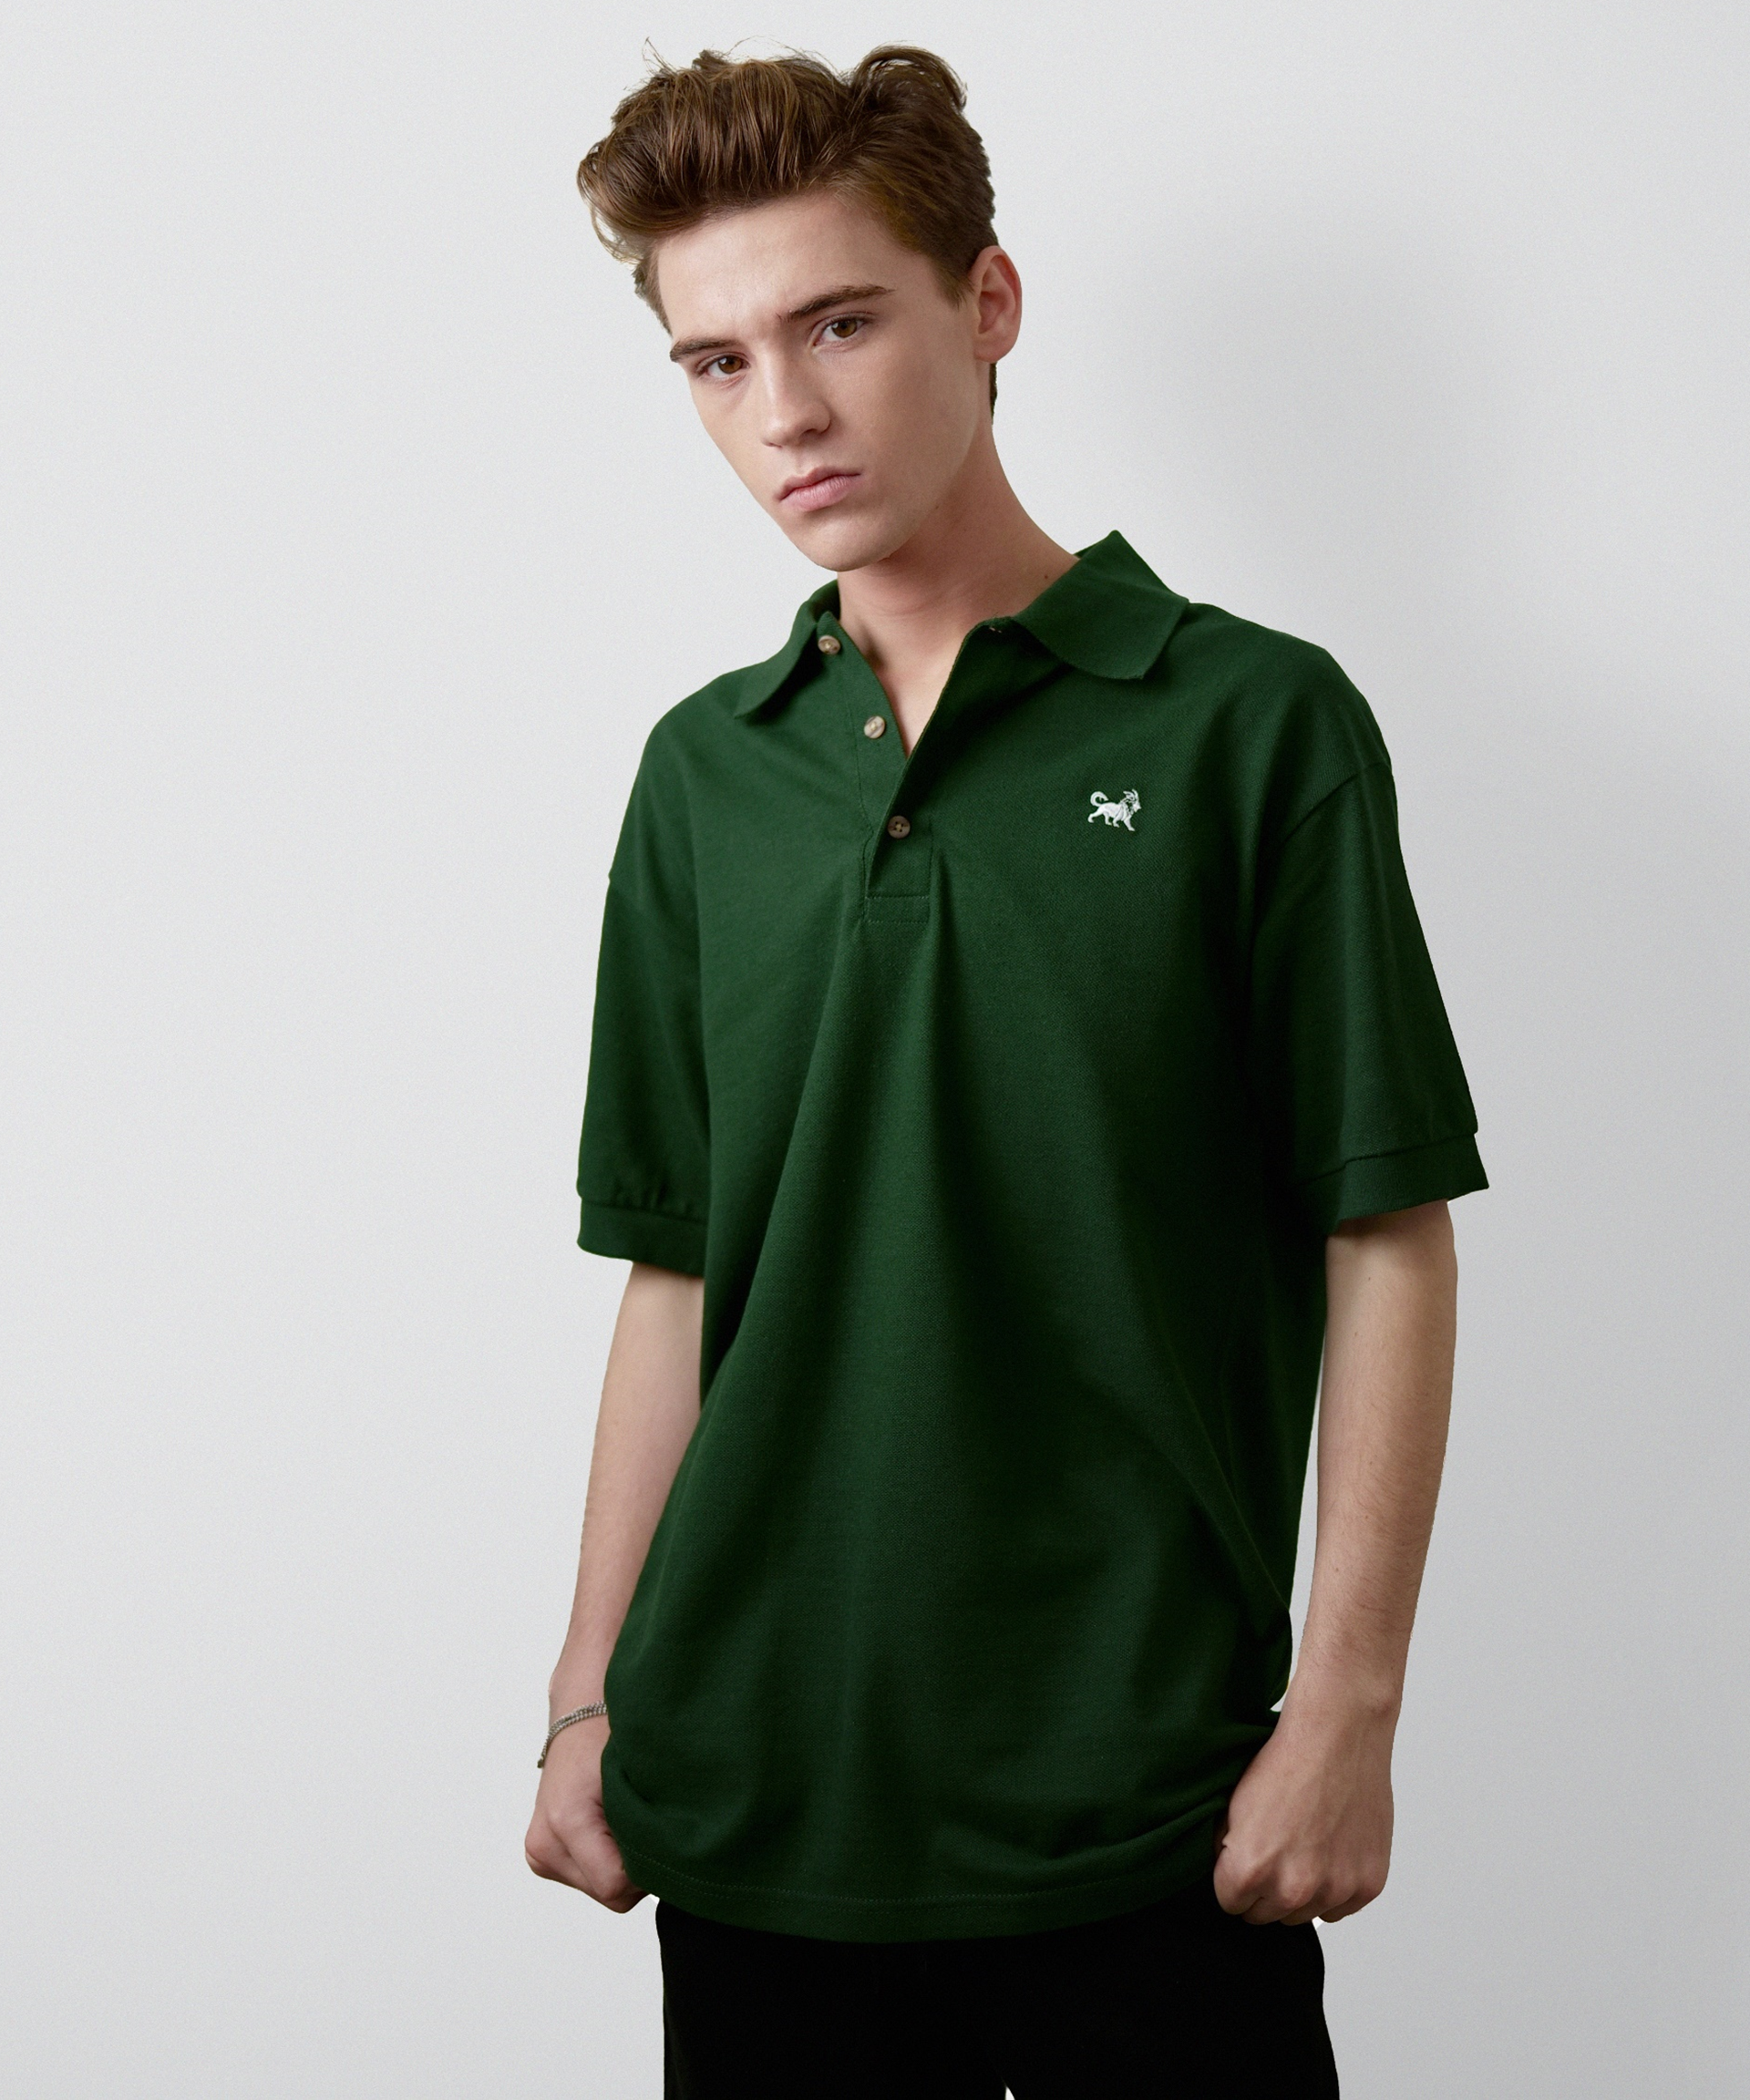 Signature Polo Shirt for Men (Forest Green)